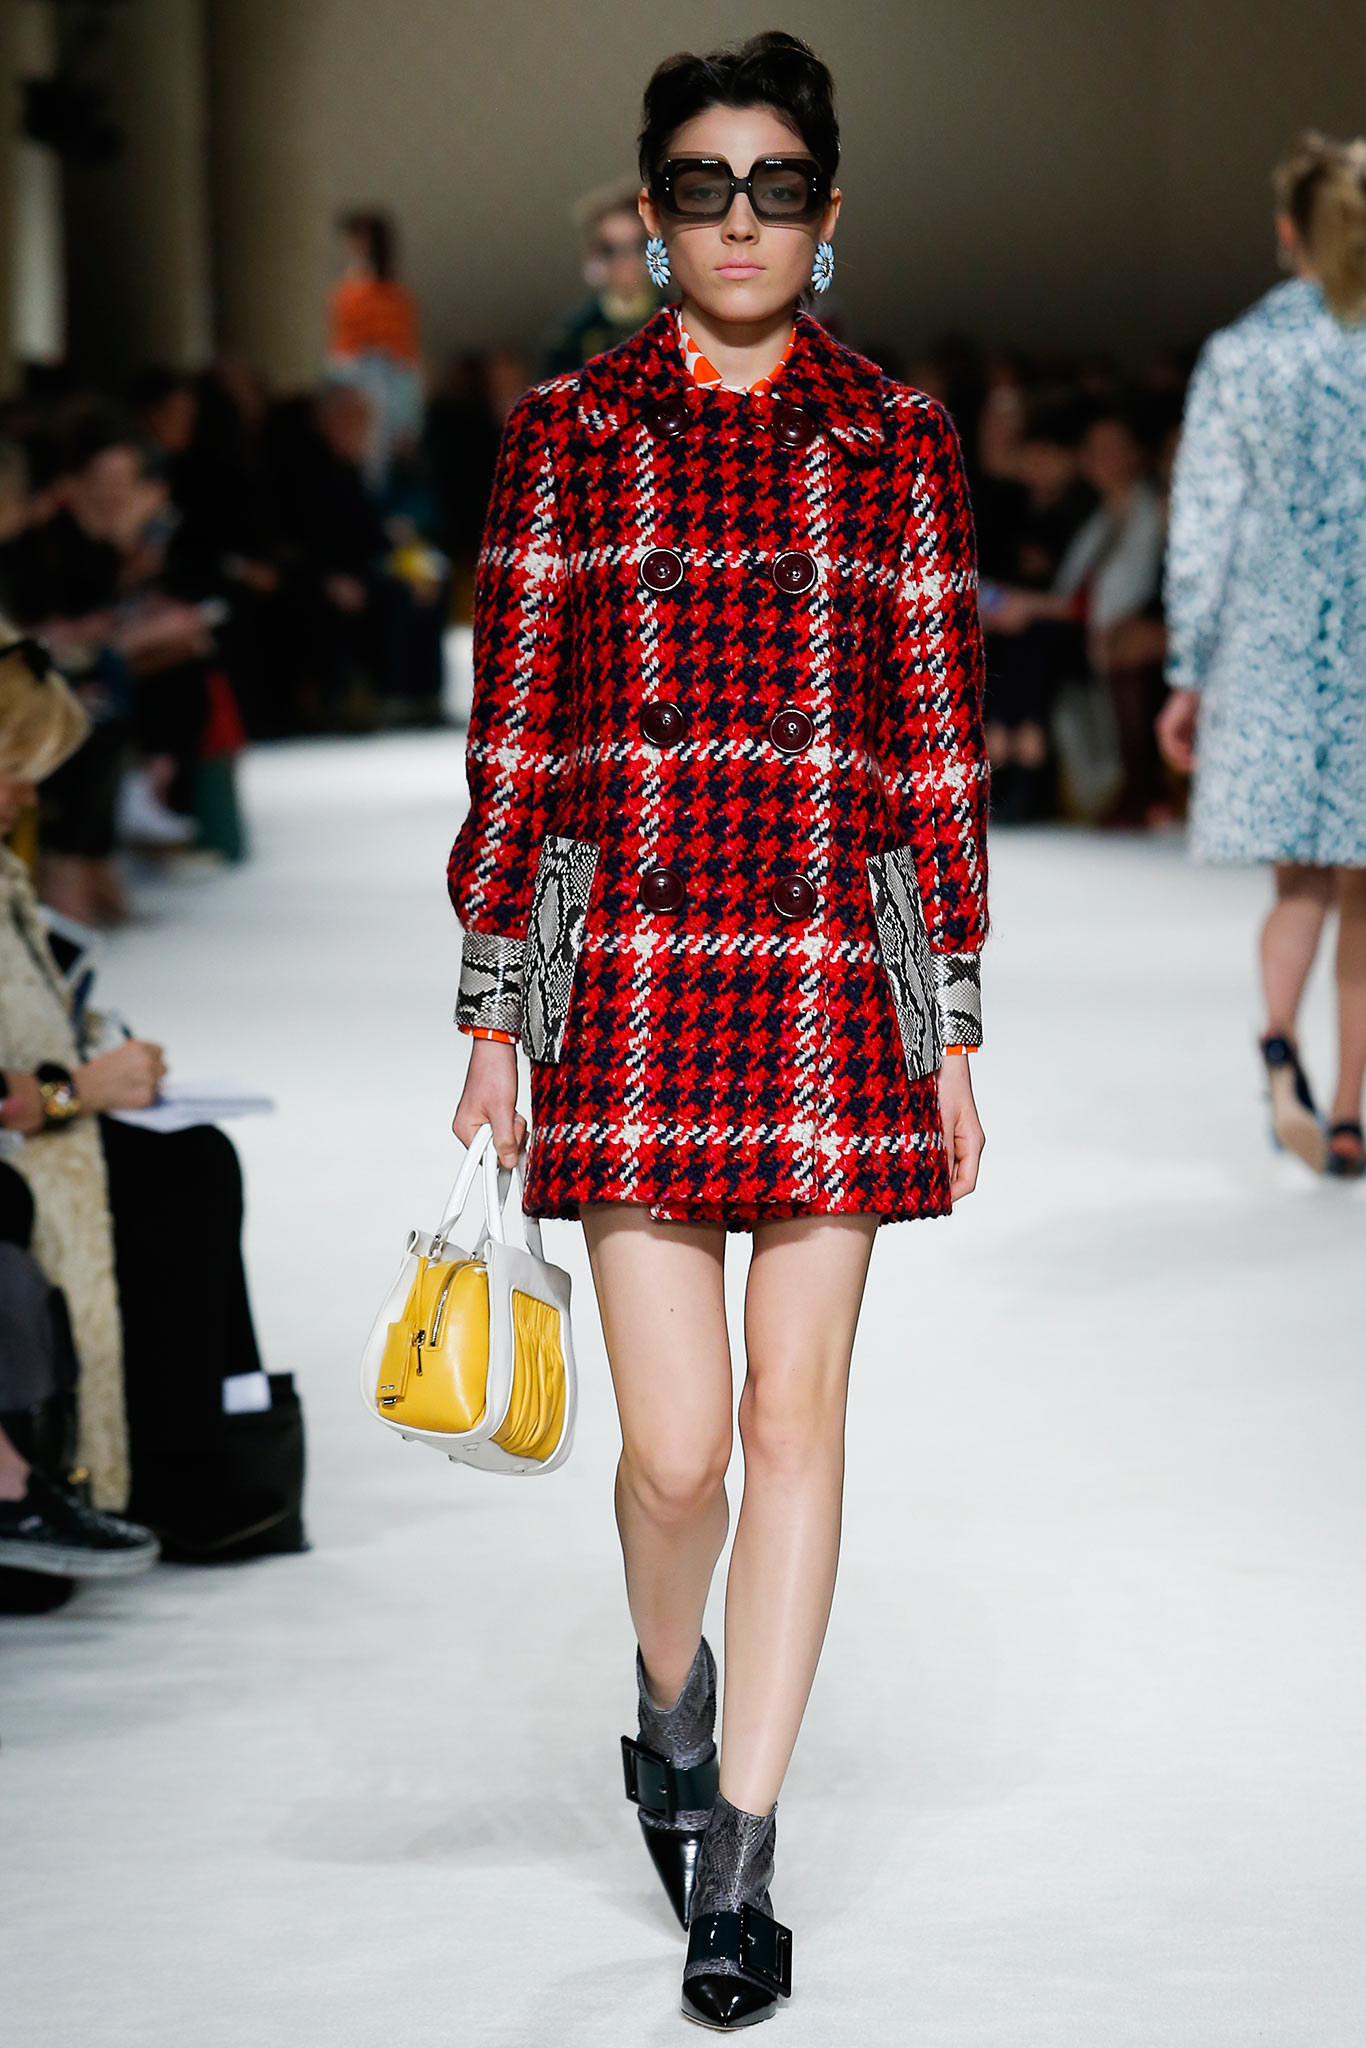 Fall Trends 2015 - Houndstooth Print - Fashionsizzle